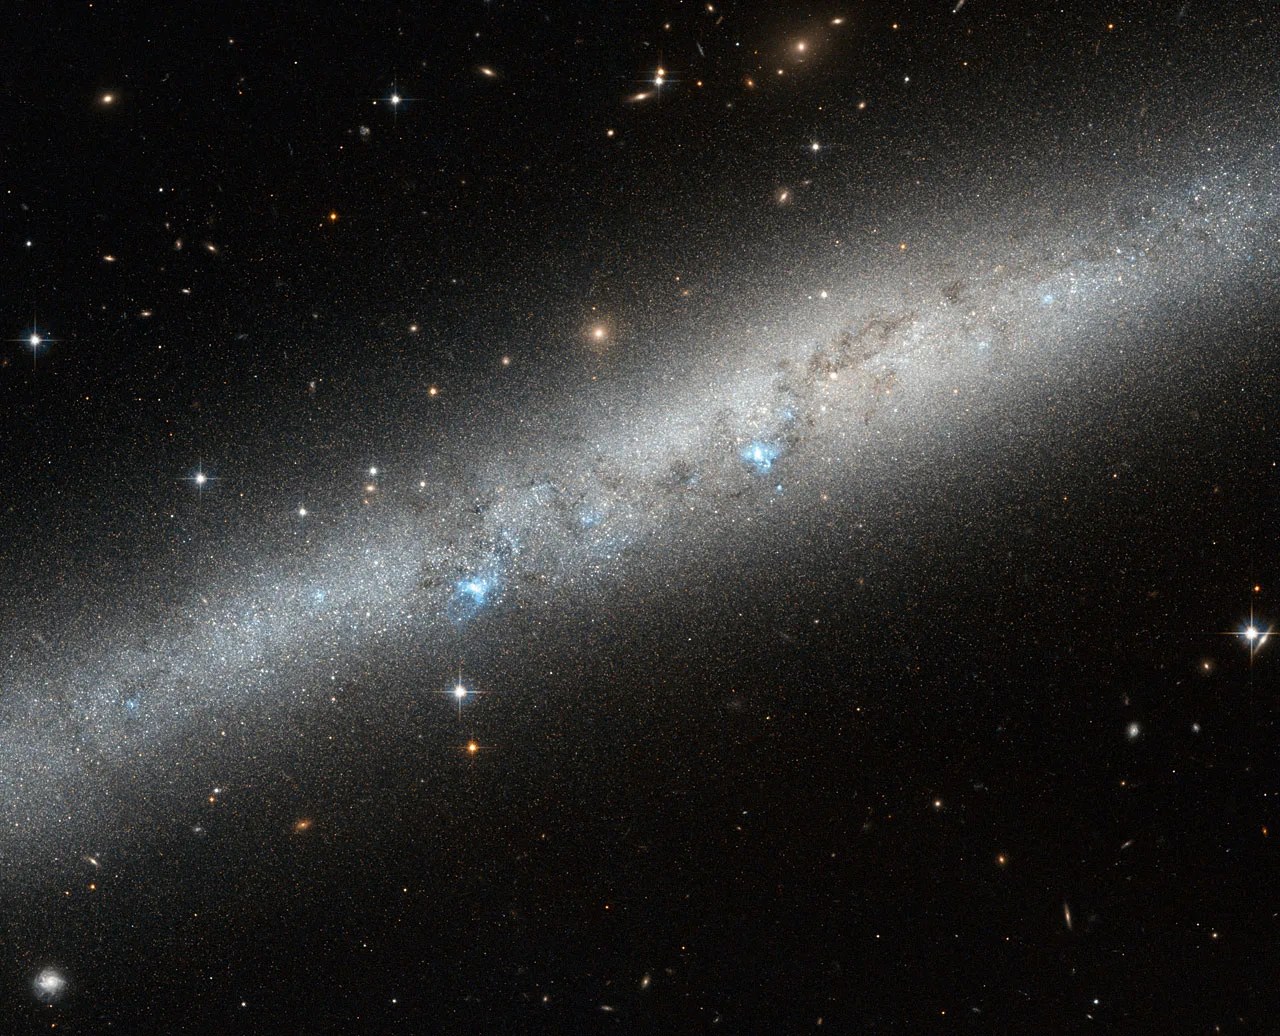 Hubble image of part of spiral galaxy IC 5052